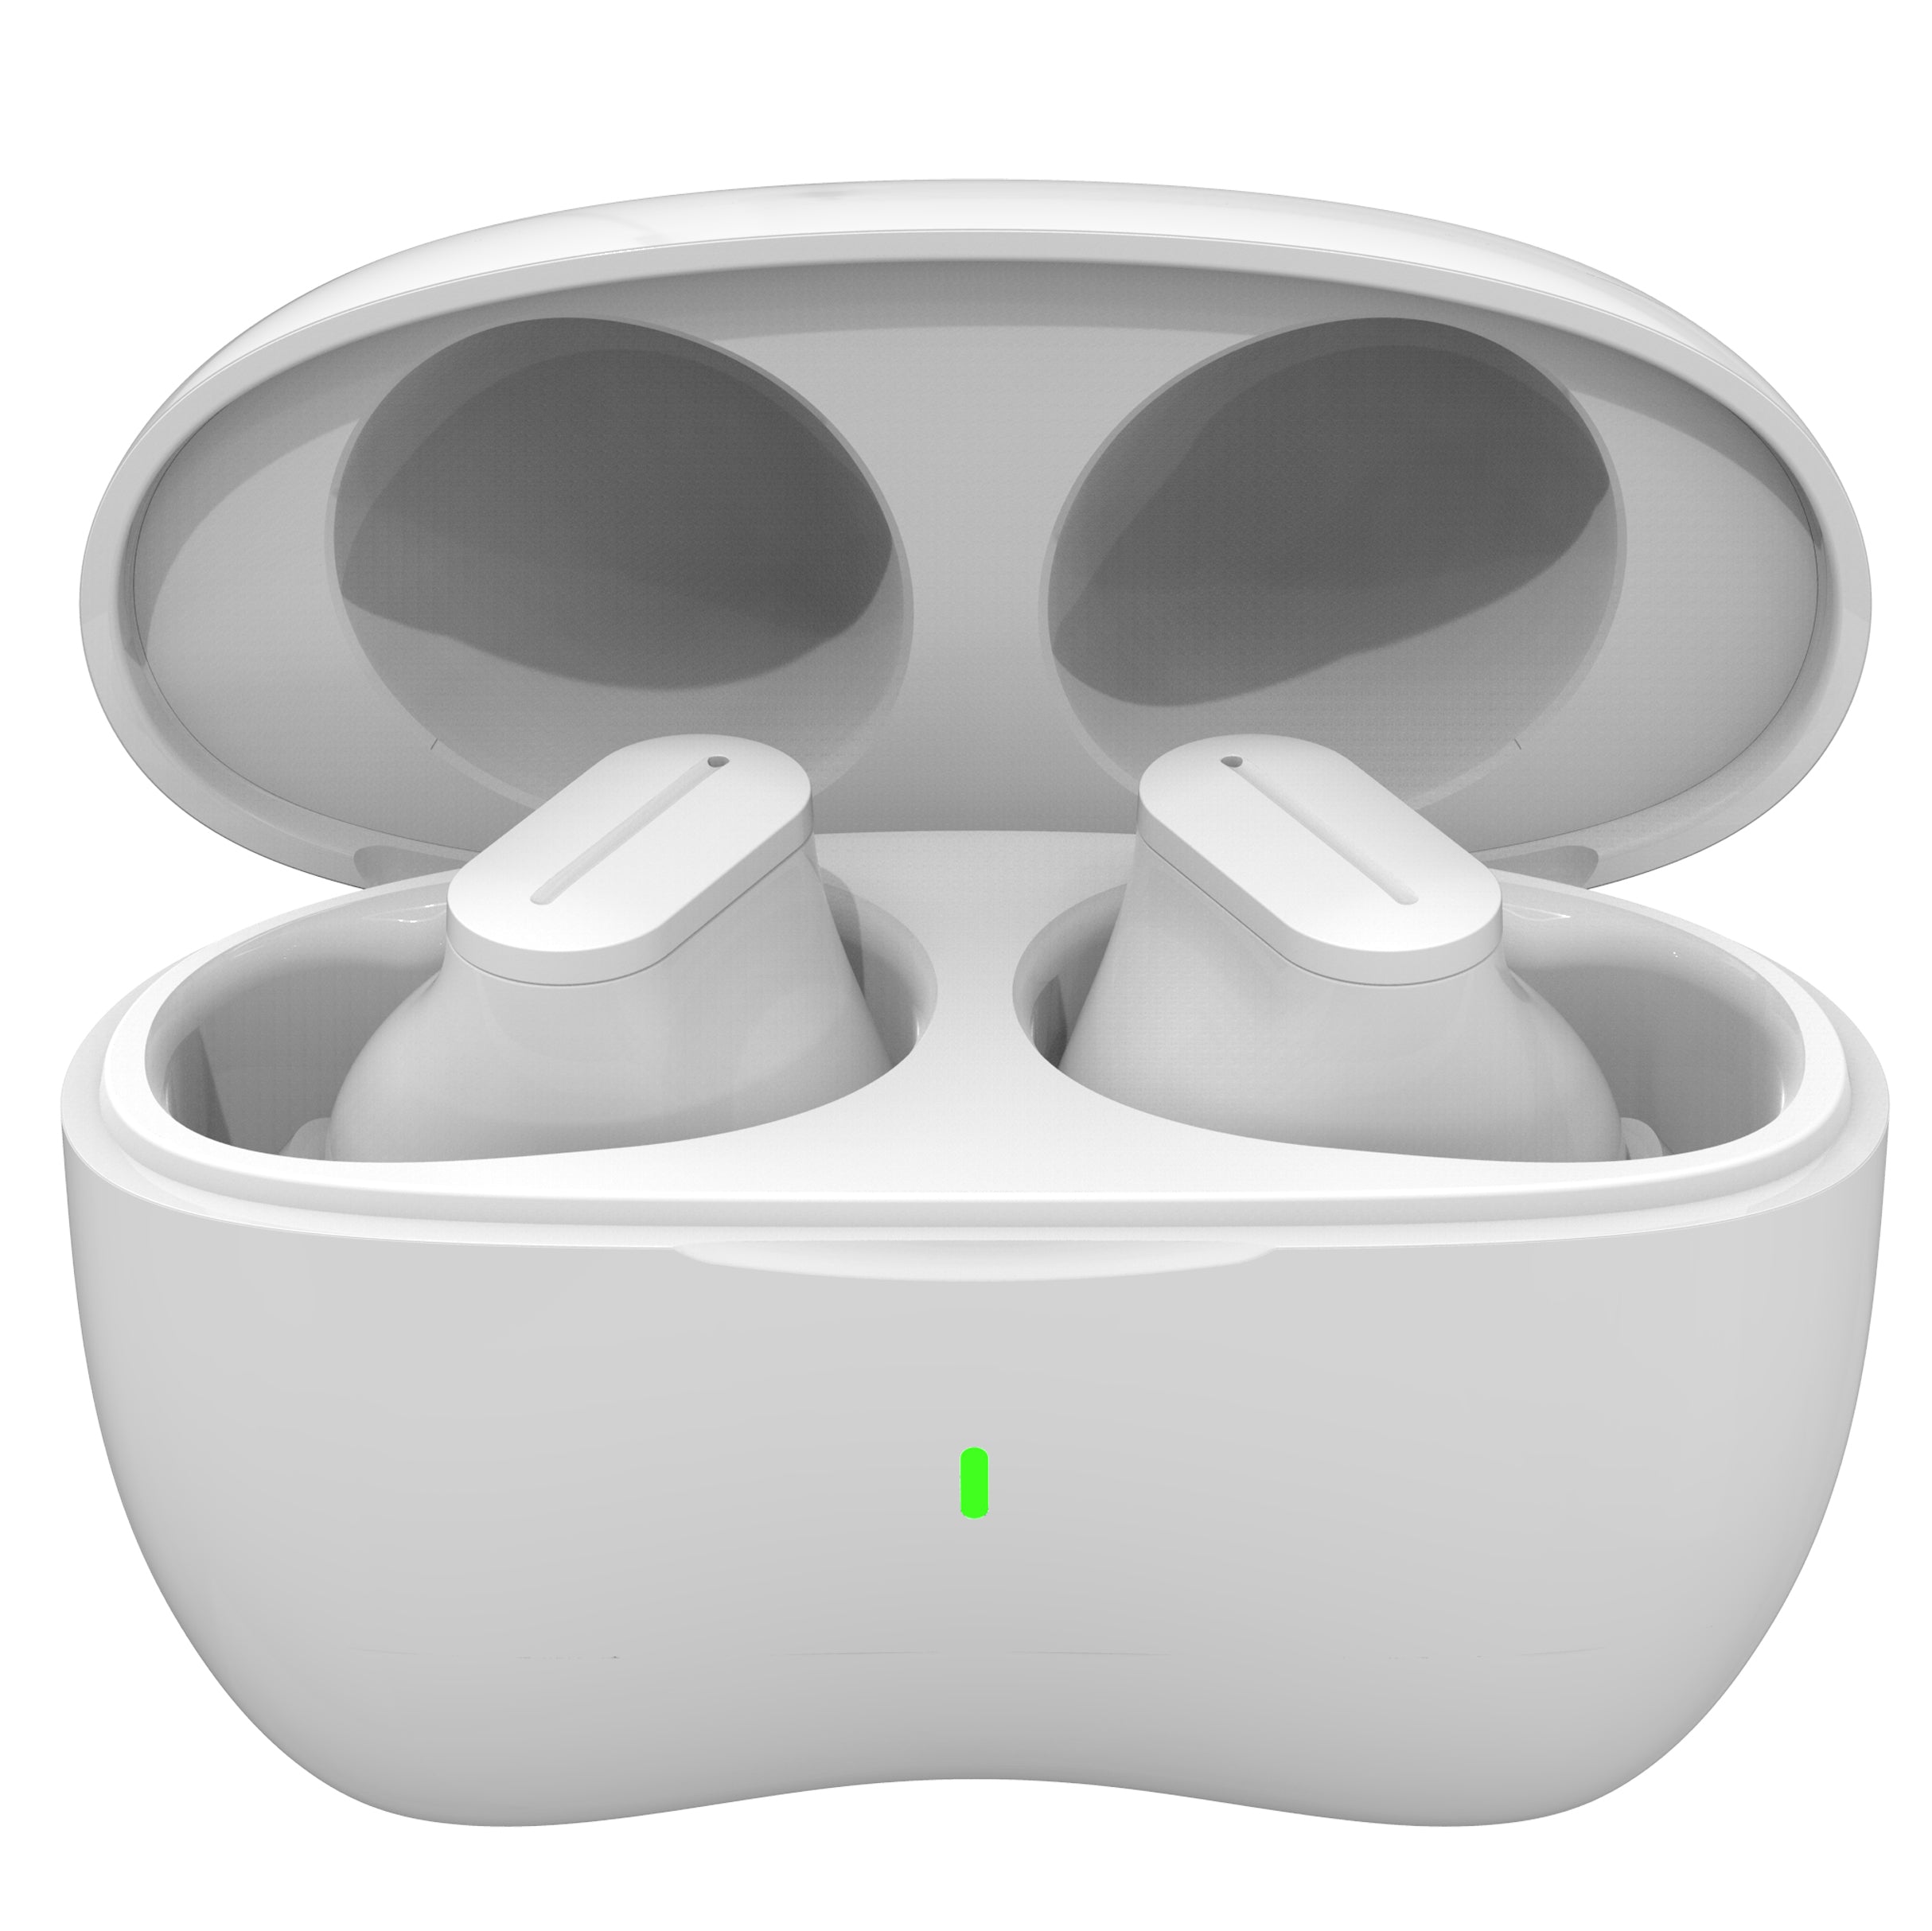 True Wireless Speaker Earbuds with Charging Case – Supersonic Inc